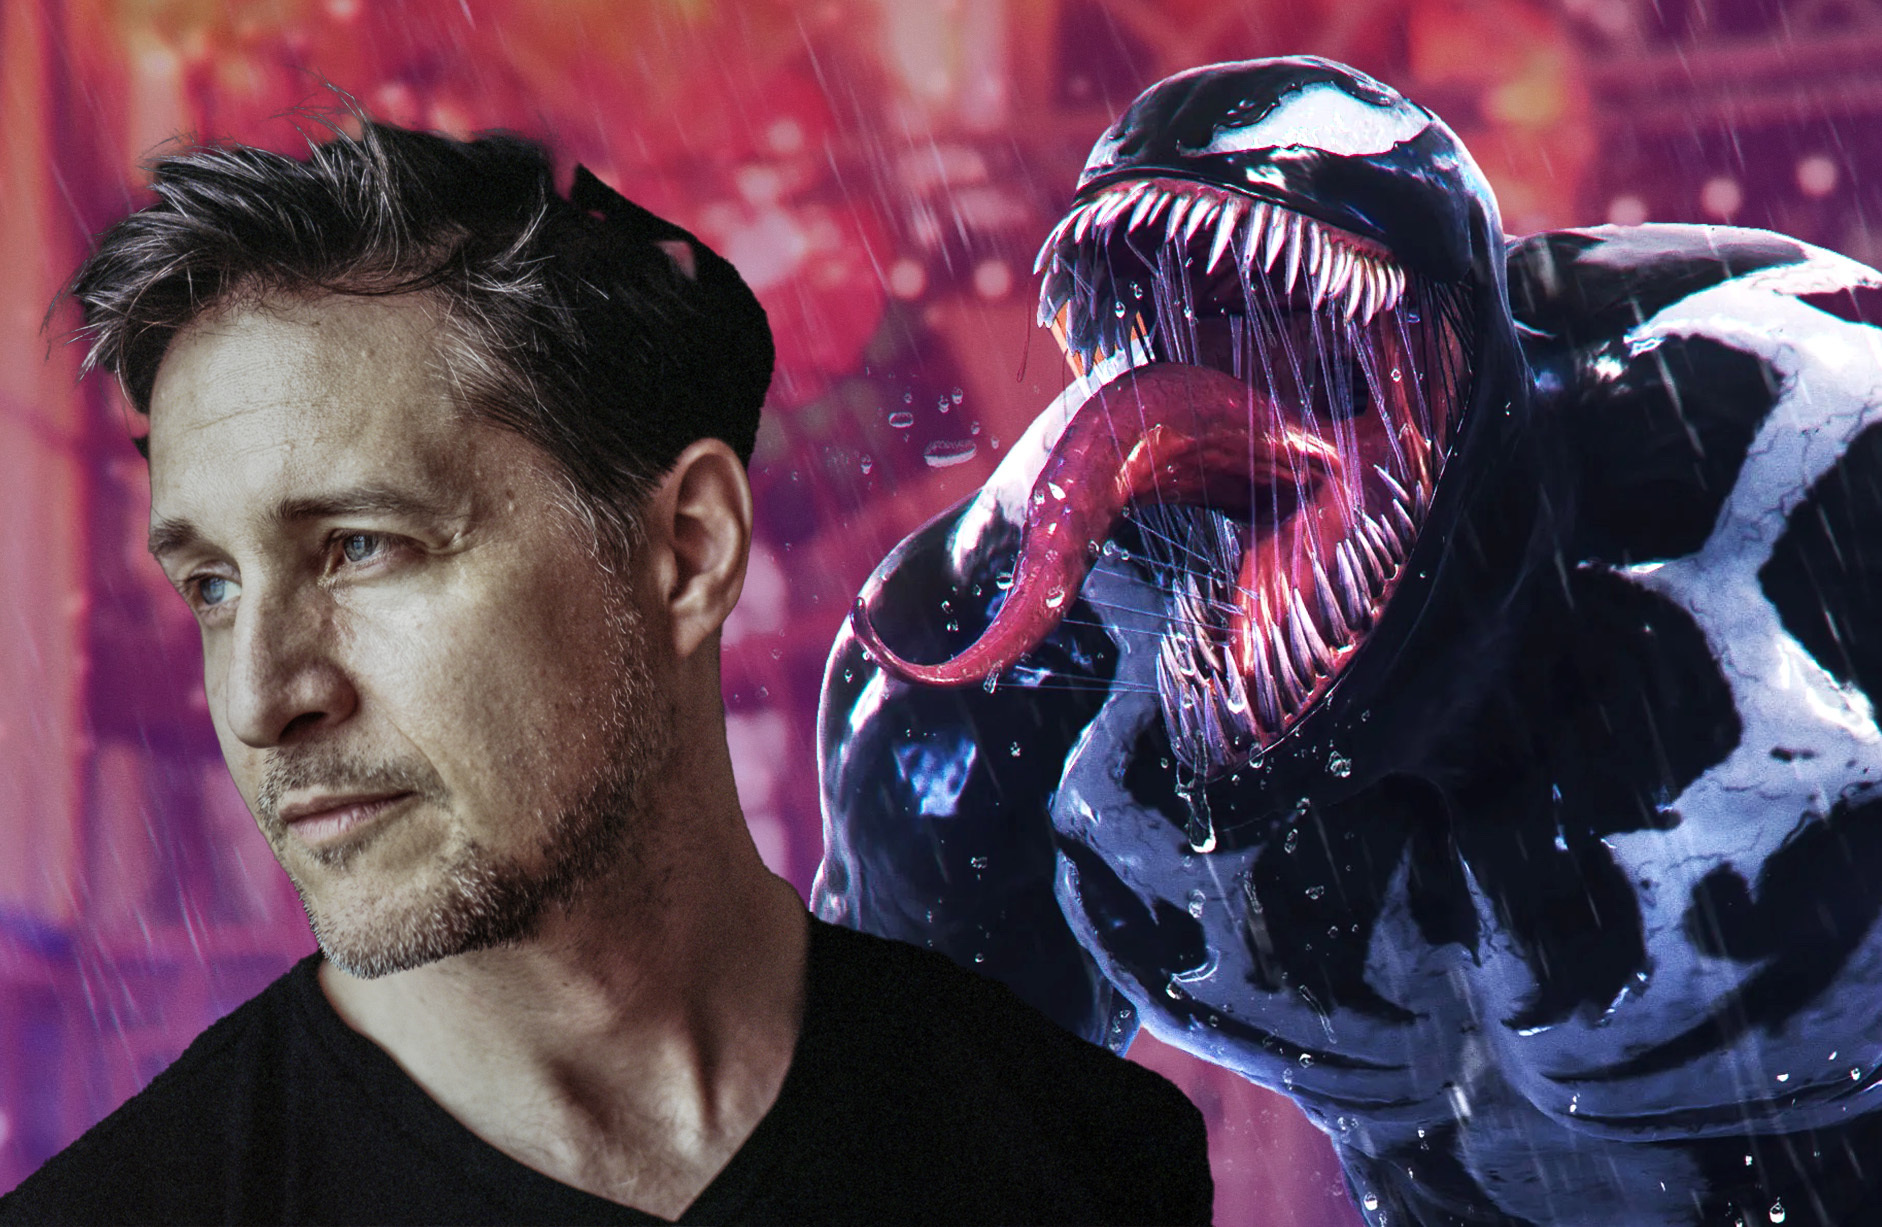 At left, a headshot of Yuri Lowenthal; at right, an image of Venom from Insomniac Games’ Spider-Man 2